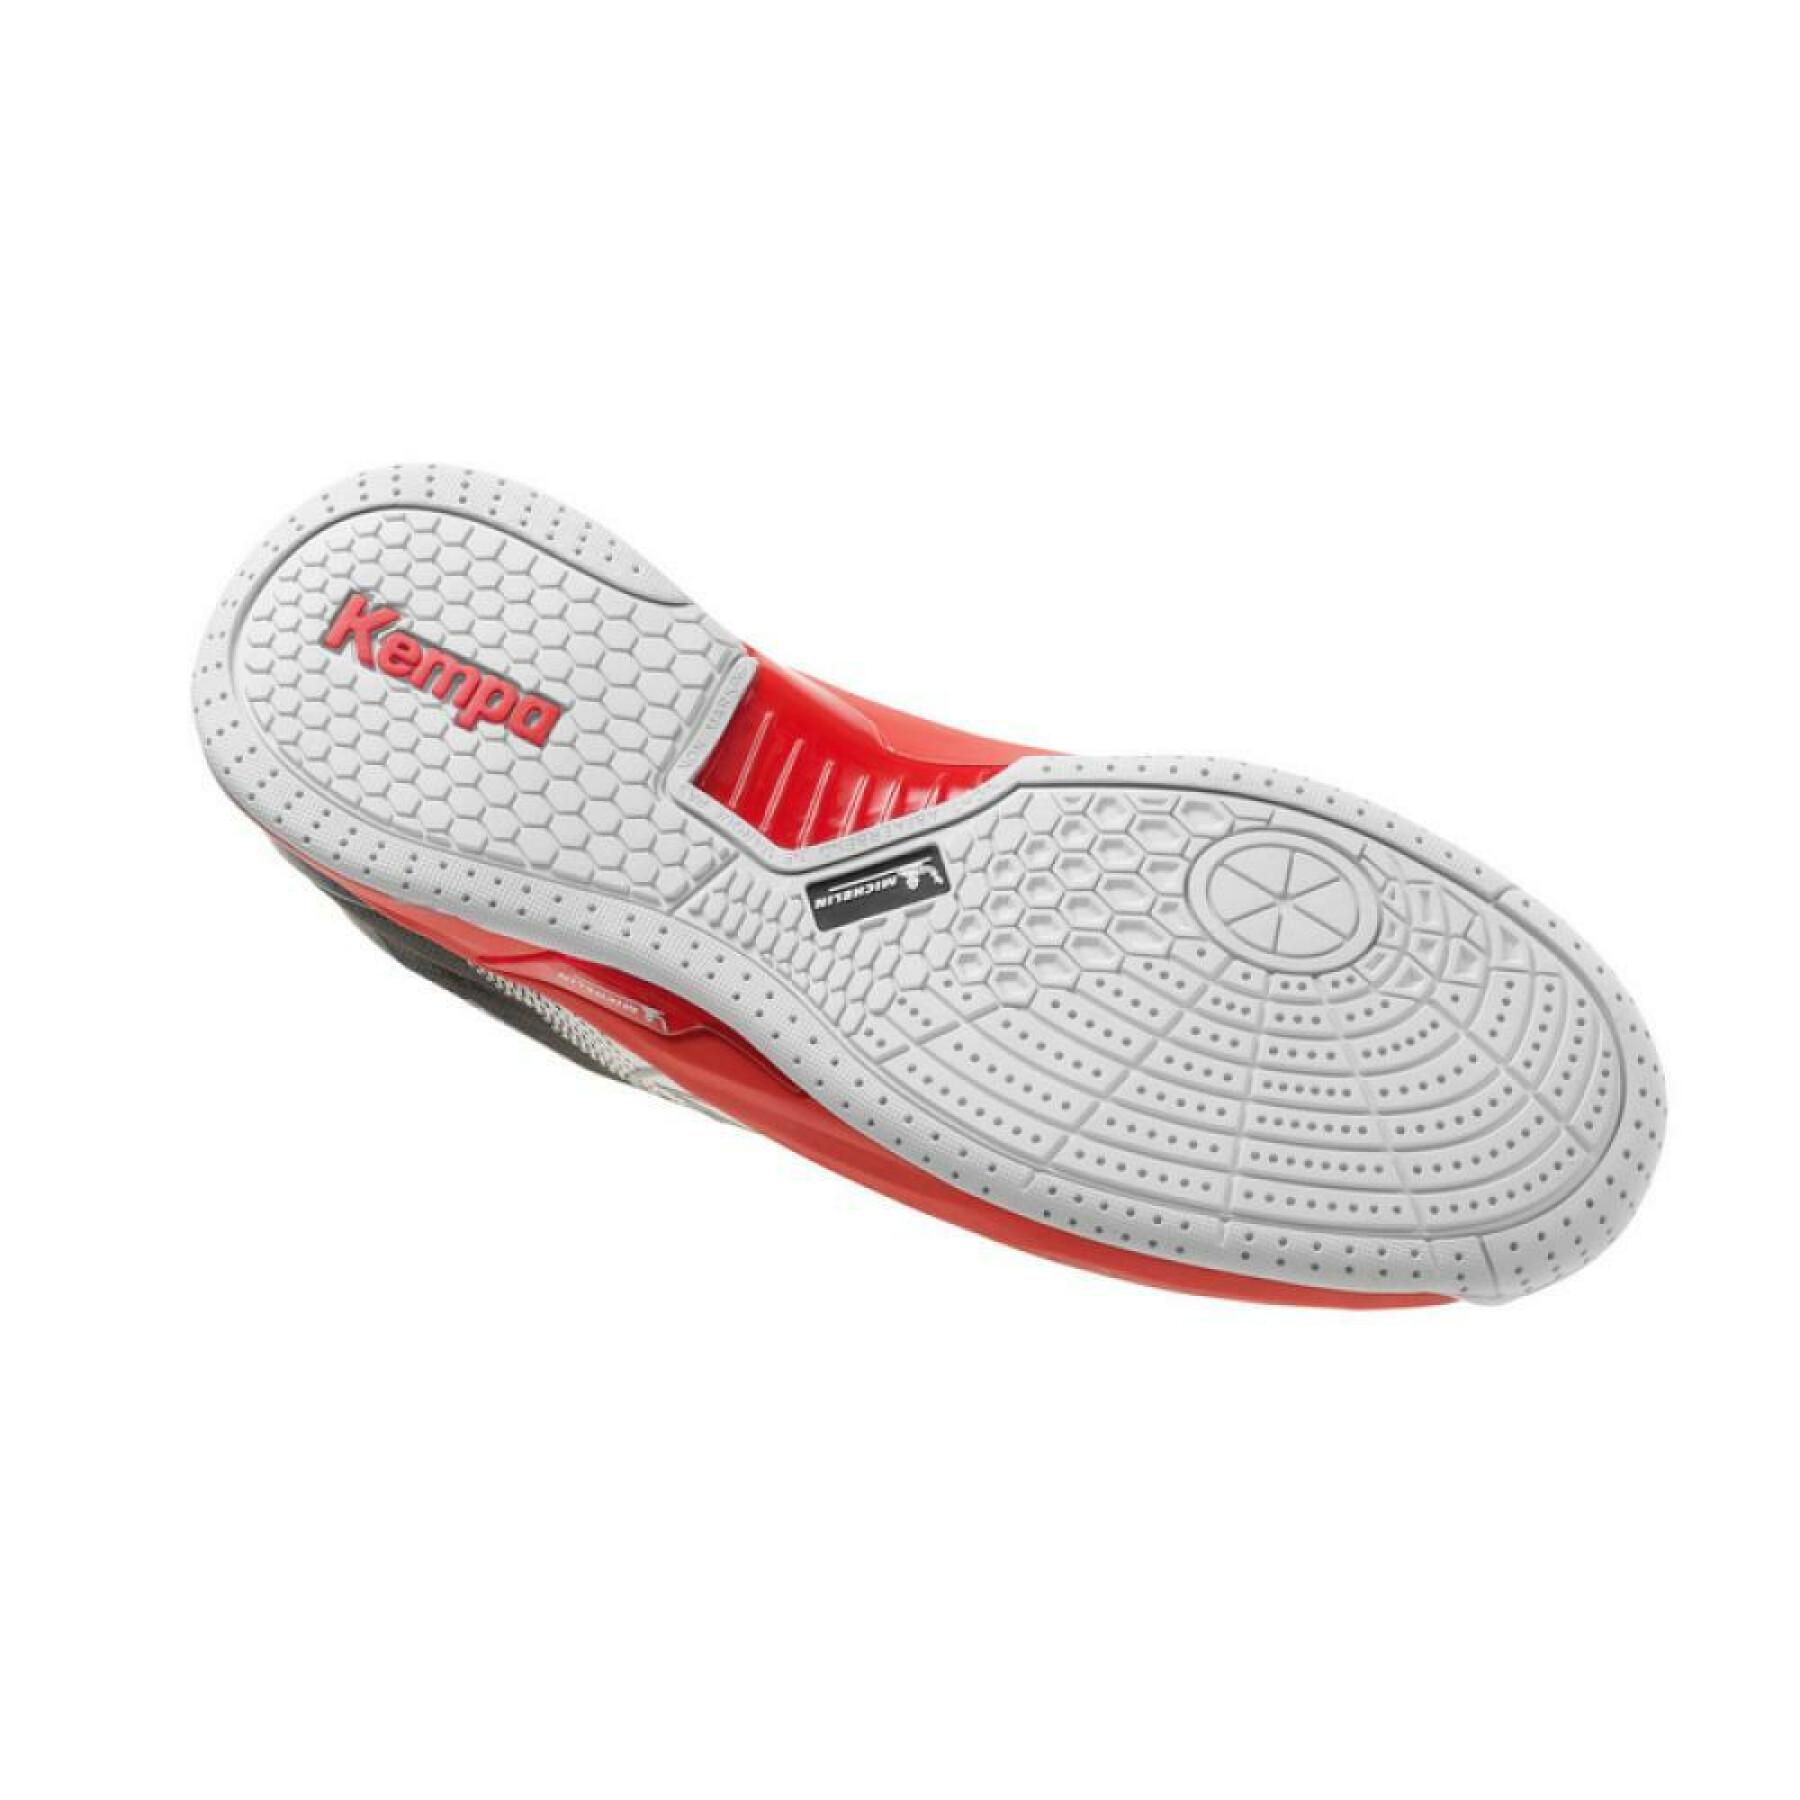 Indoor shoes Kempa Attack Two 2.0